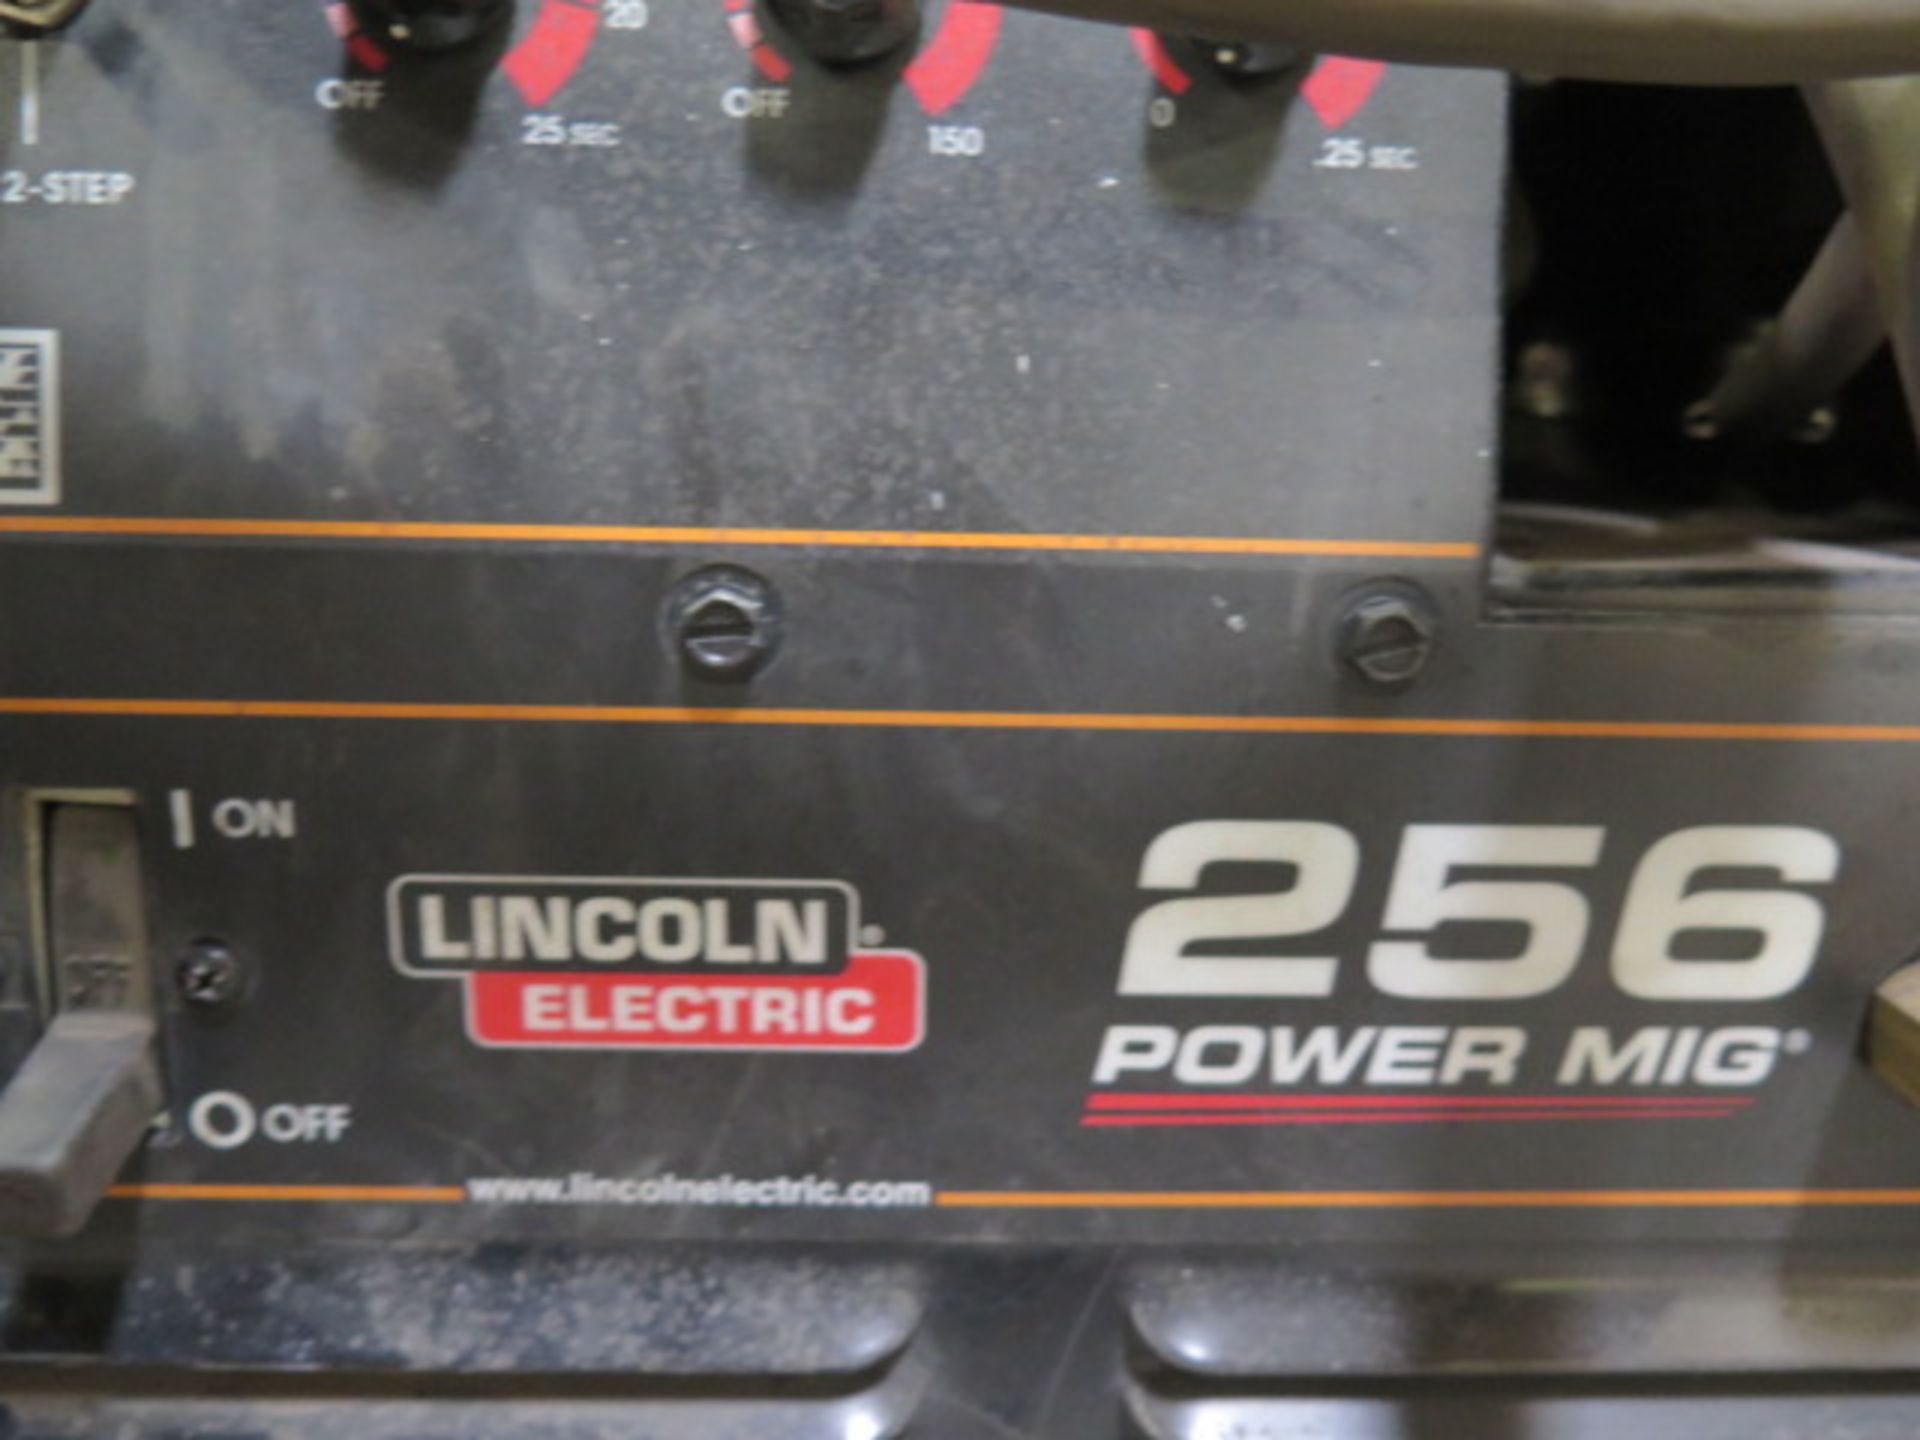 Lincoln Power MIG 256 MIG Welding Power Source s/n M3170510288 (SOLD AS-IS - NO WATRRANTY) - Image 7 of 8